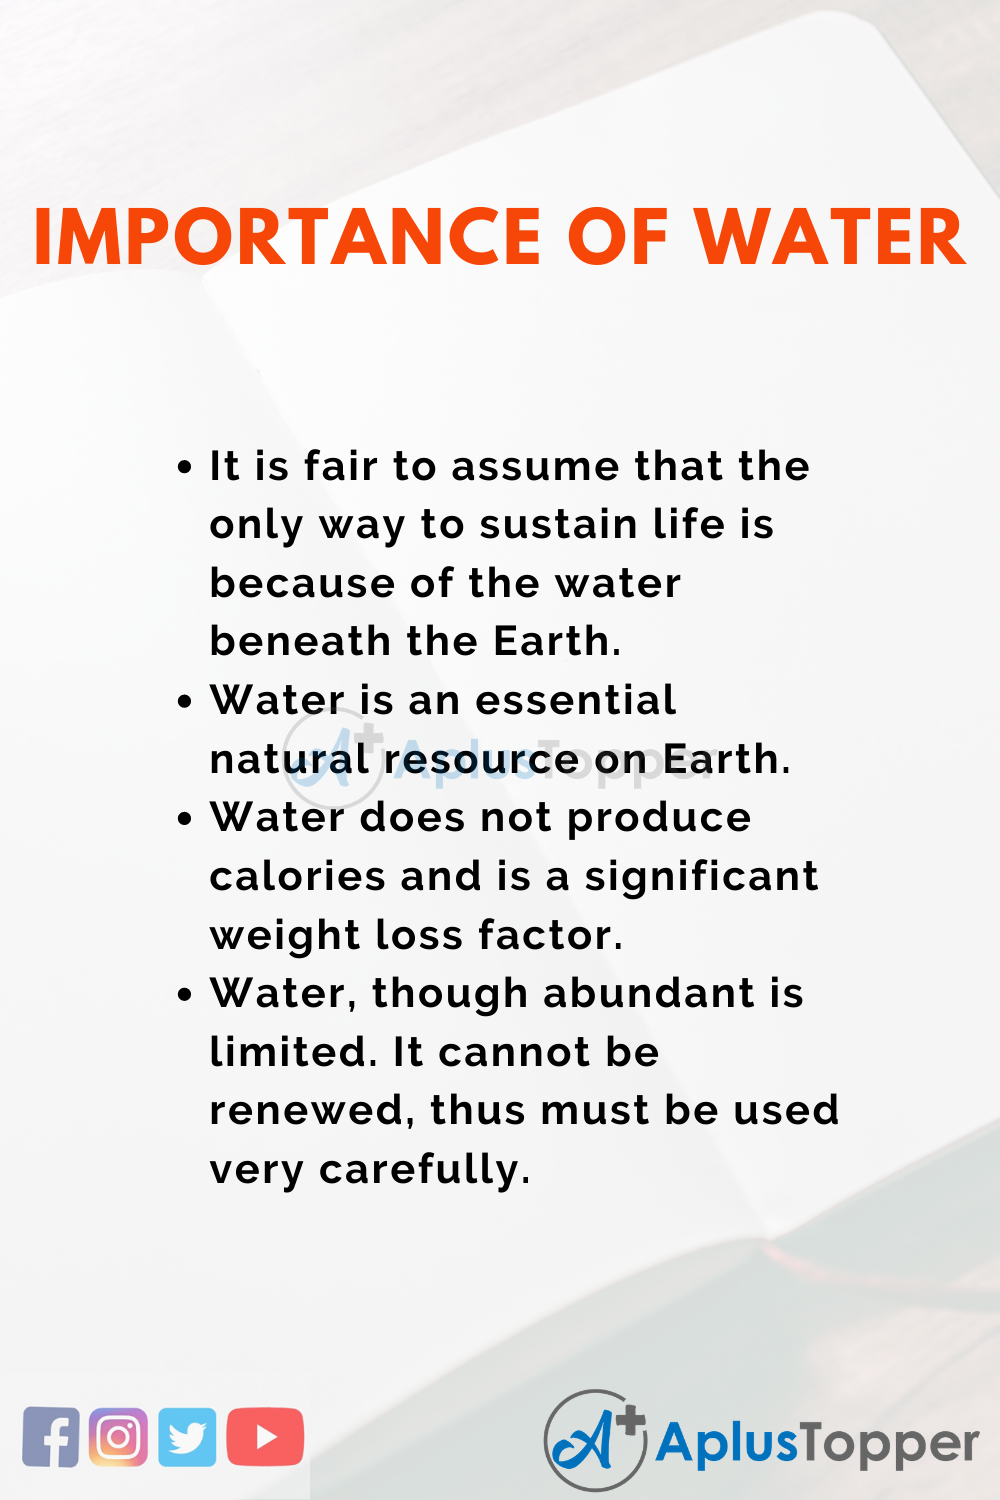 Importance of Water Essay